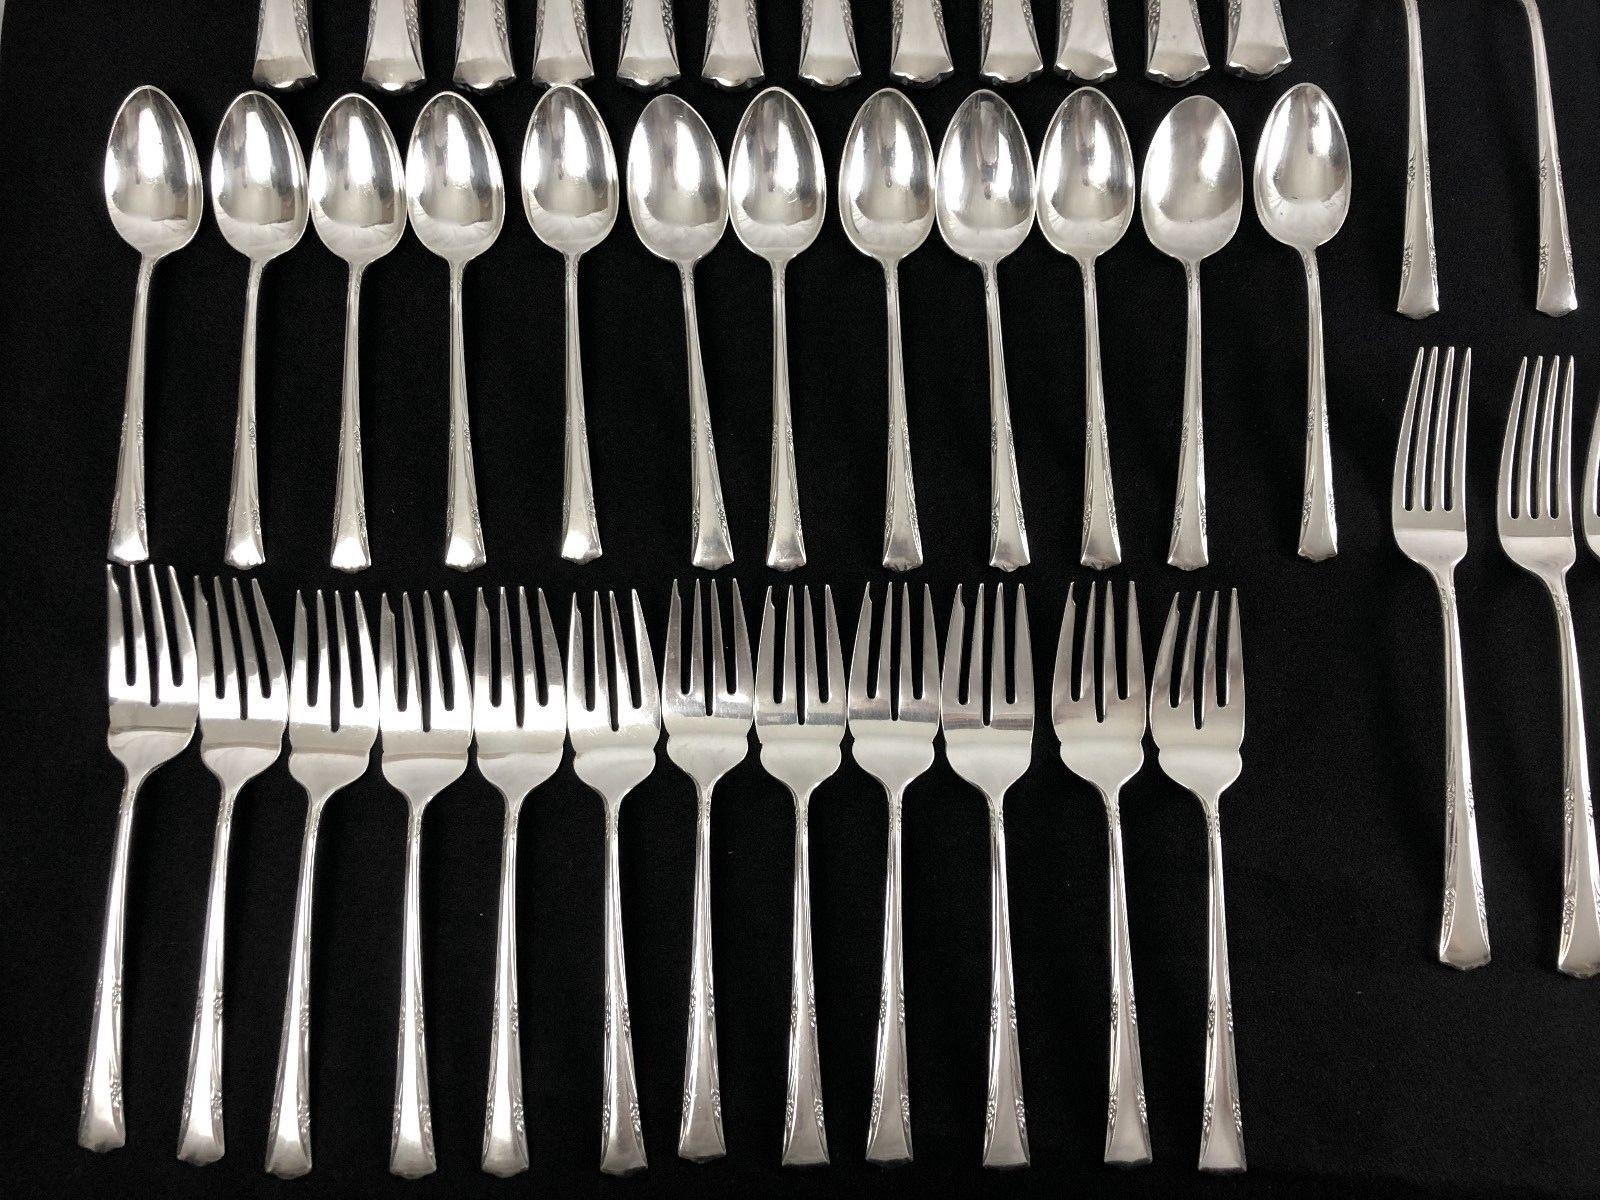 20th Century Gorham Greenbrier Service for 12, Sterling Silver, 1938, No Monogram, 77 Pieces